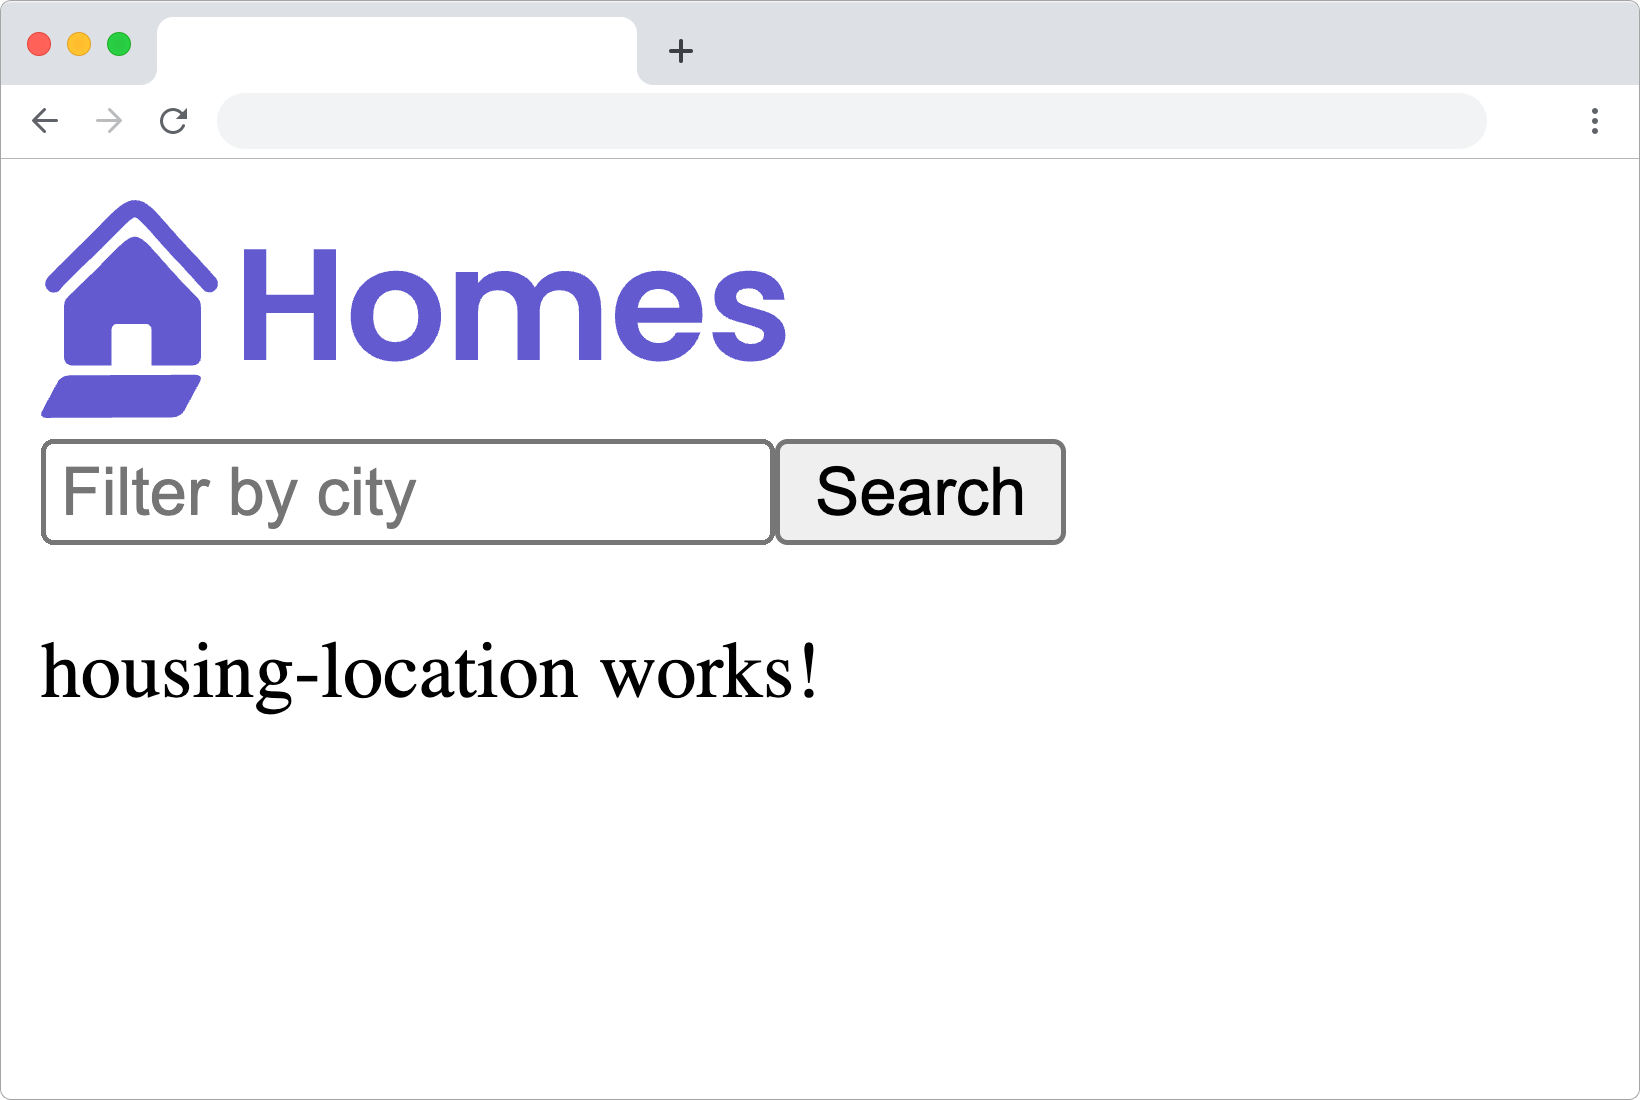 browser frame of homes-app displaying logo, filter text input box and search button and the message 'housing-location works!'